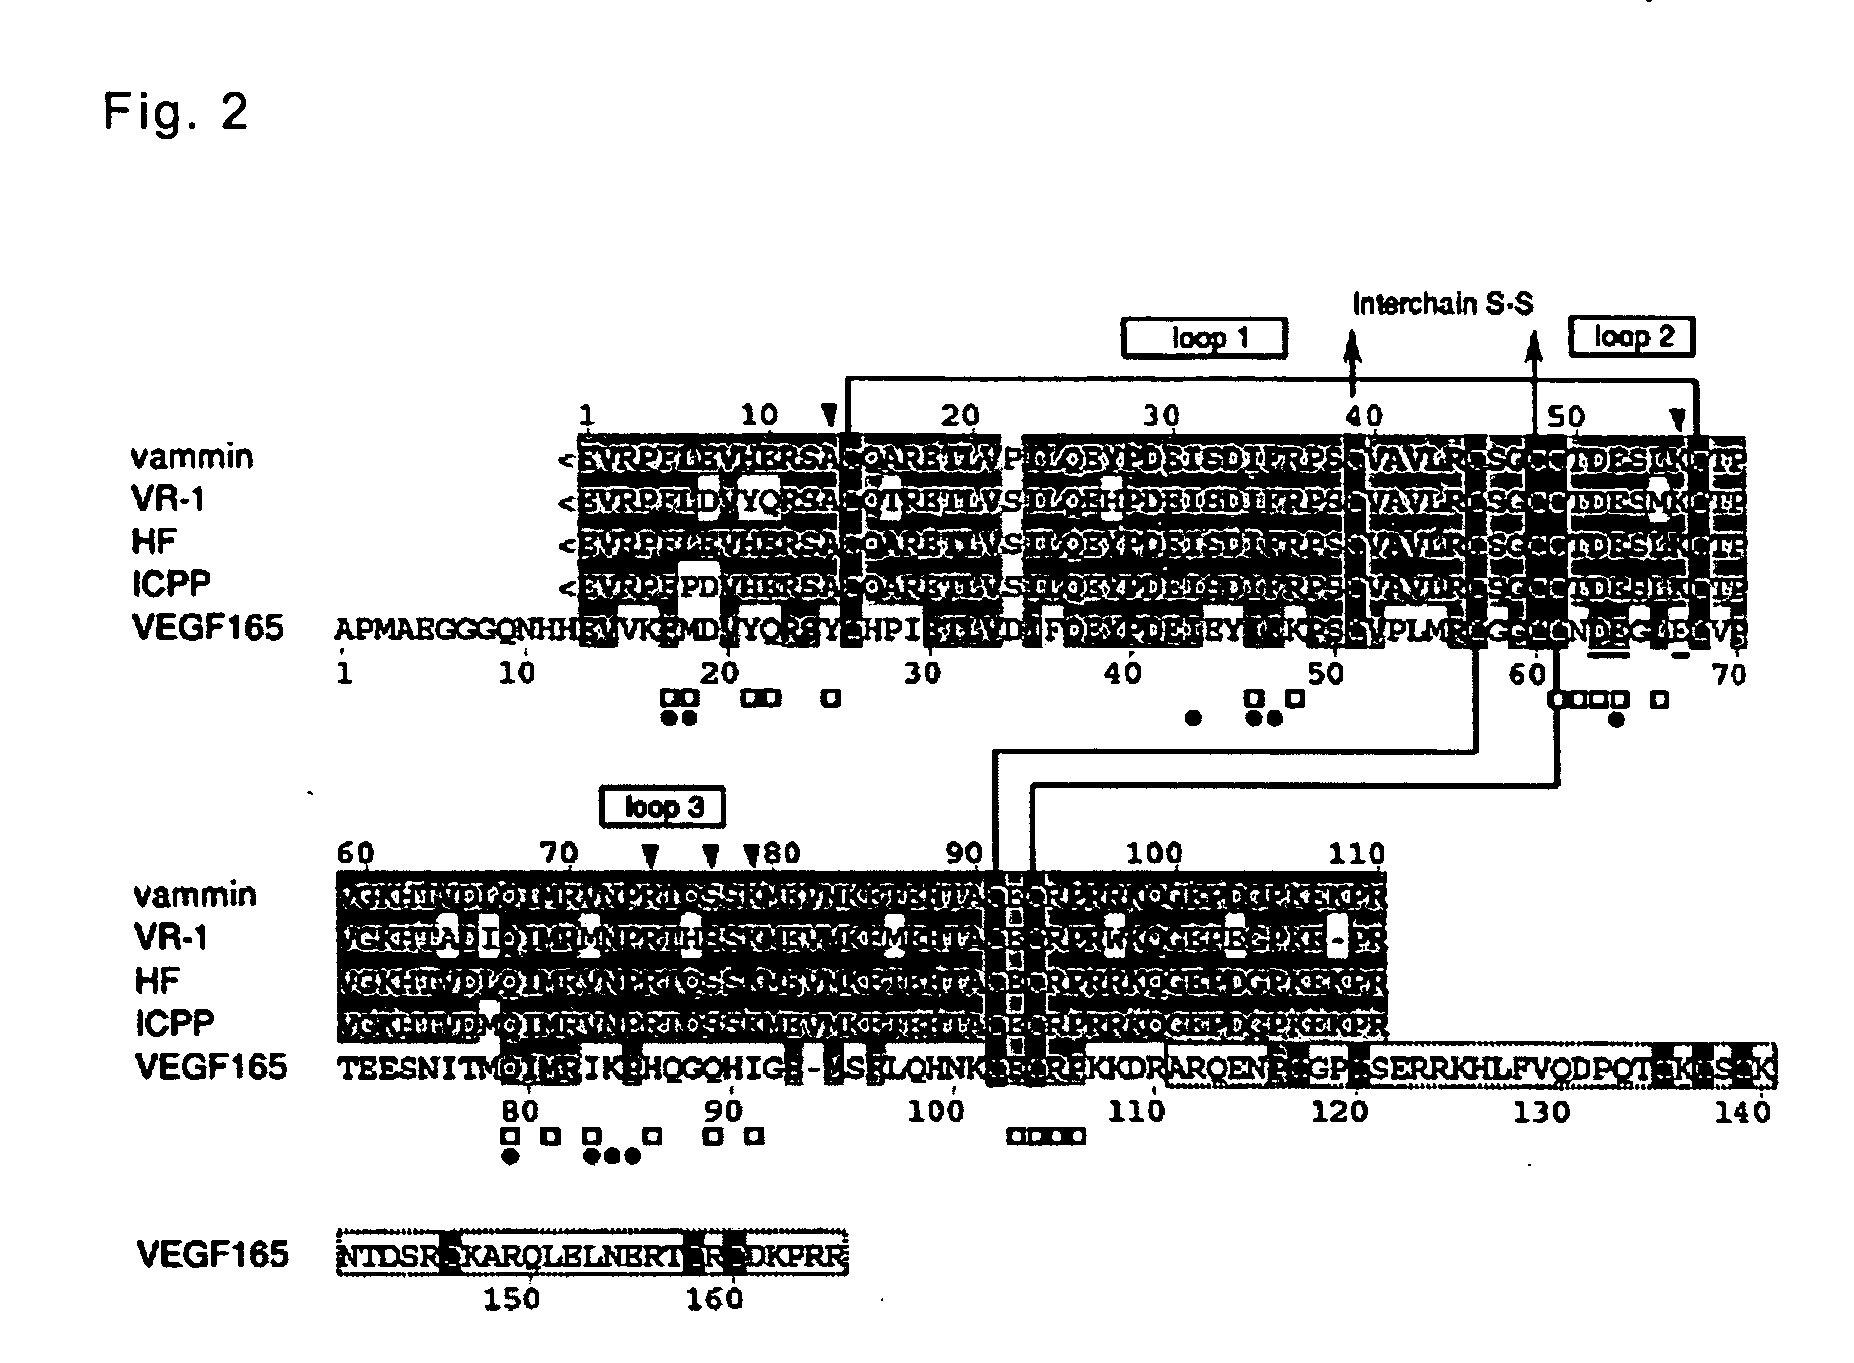 Venom-derived vascular endothelial growth factor-like protein having binding activity specific to vascular endothelial growth factor receptor type 2 and use thereof